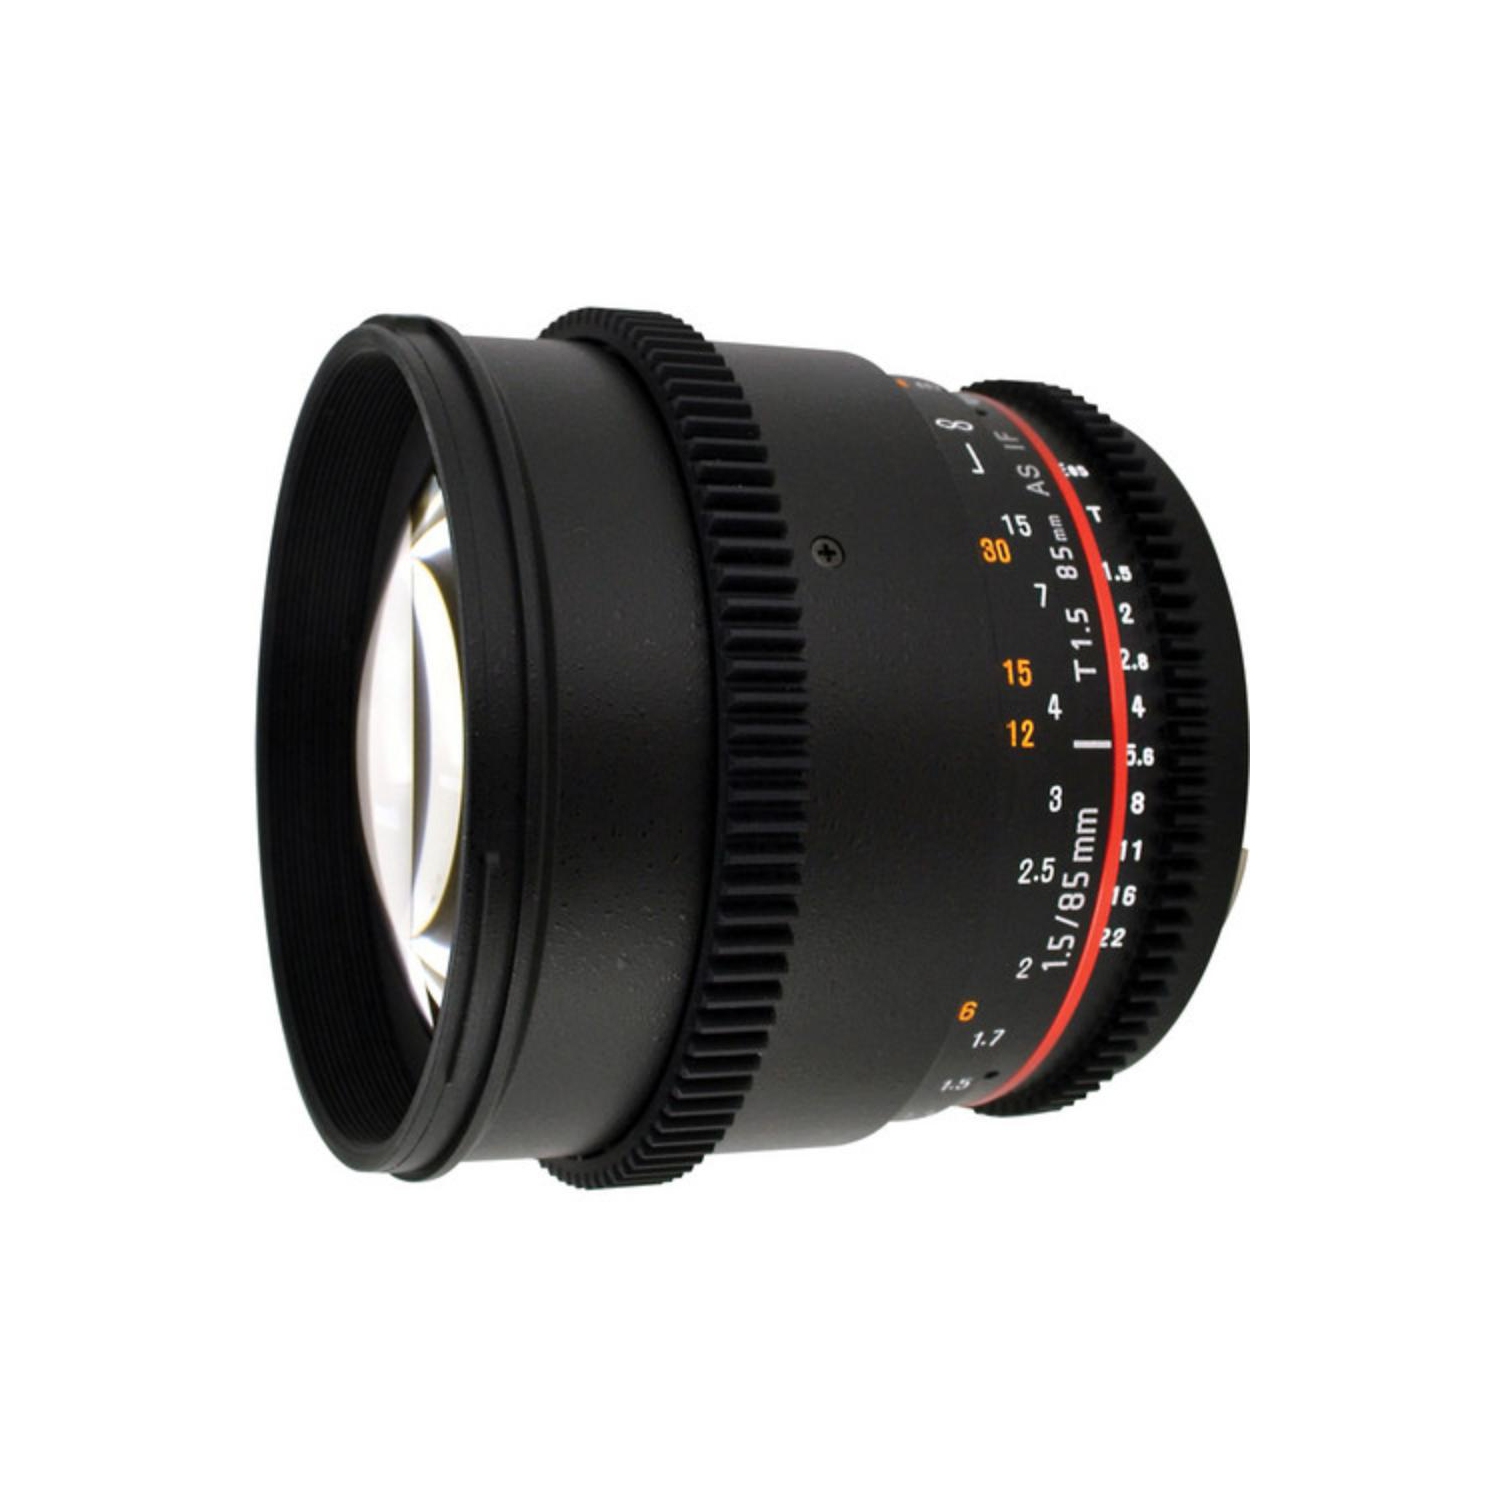 Relaunch Aggregator The High-power 85mm T1.5 Portrait Cine Lens For Sony Alpha Dslr Cameras Is An Ex